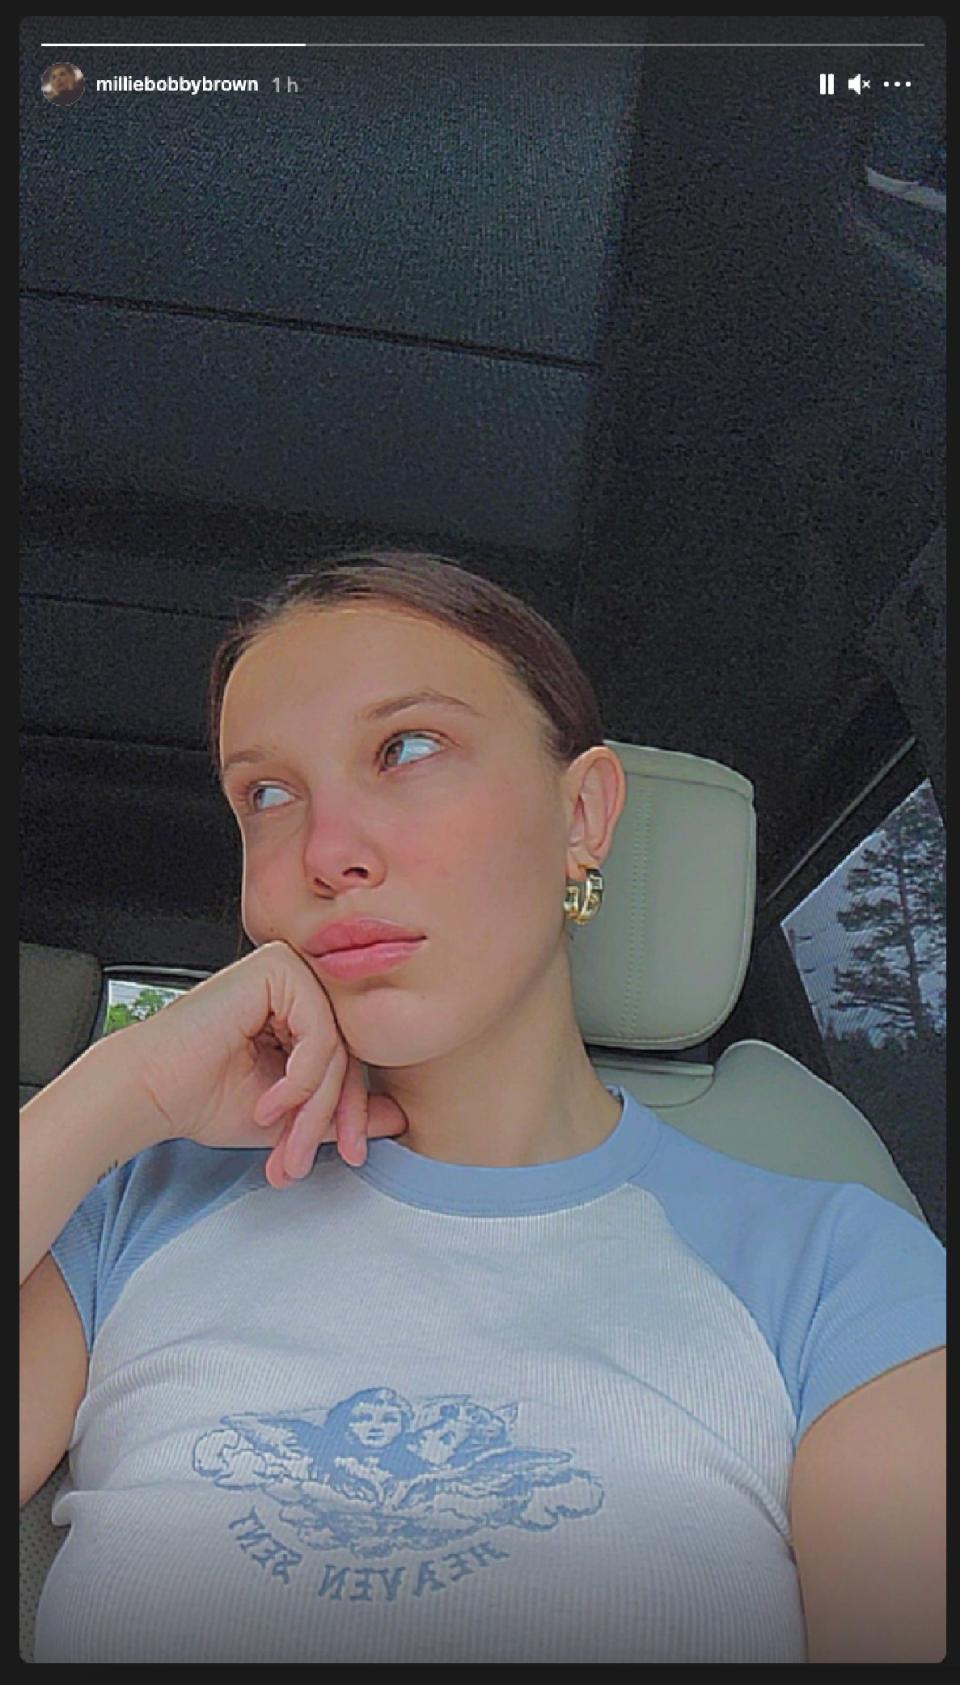 <cite class="credit">Screenshot. Courtesy of Millie Bobby Brown/Instagram @MillieBobbyBrown</cite>